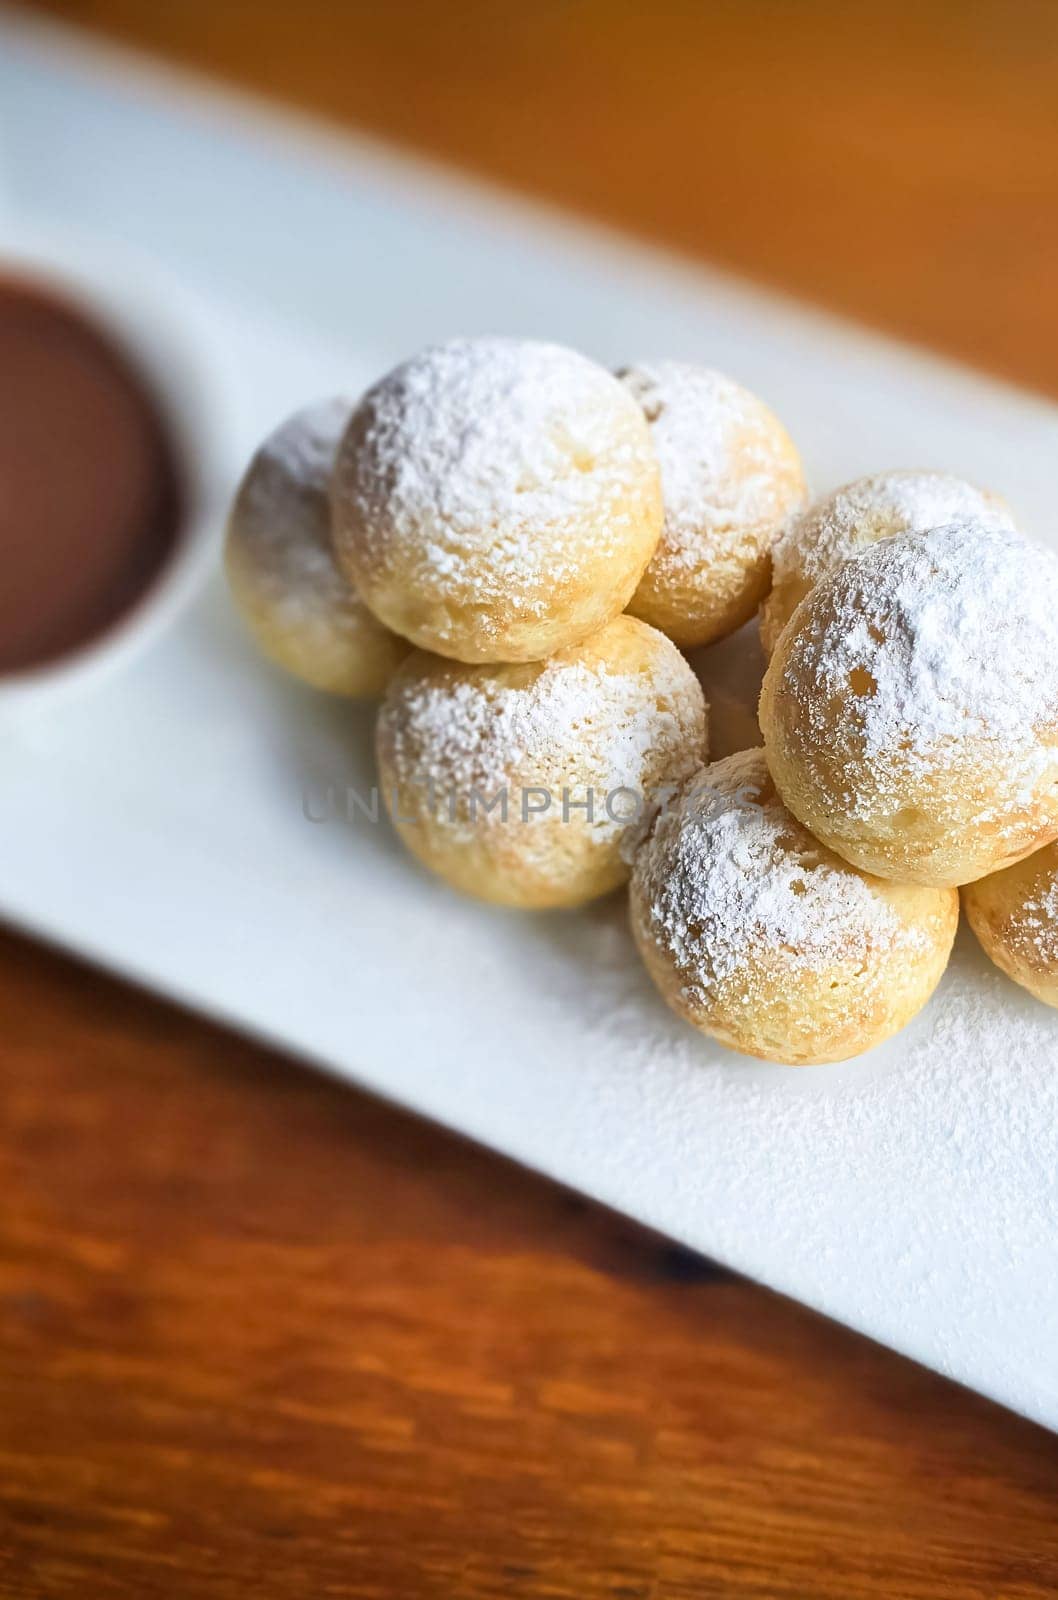 Homemade Dutch poffertjes mini pancakes with icing powdered sugar and chocolate fillings with additional chocolate sauce for delicious desserts